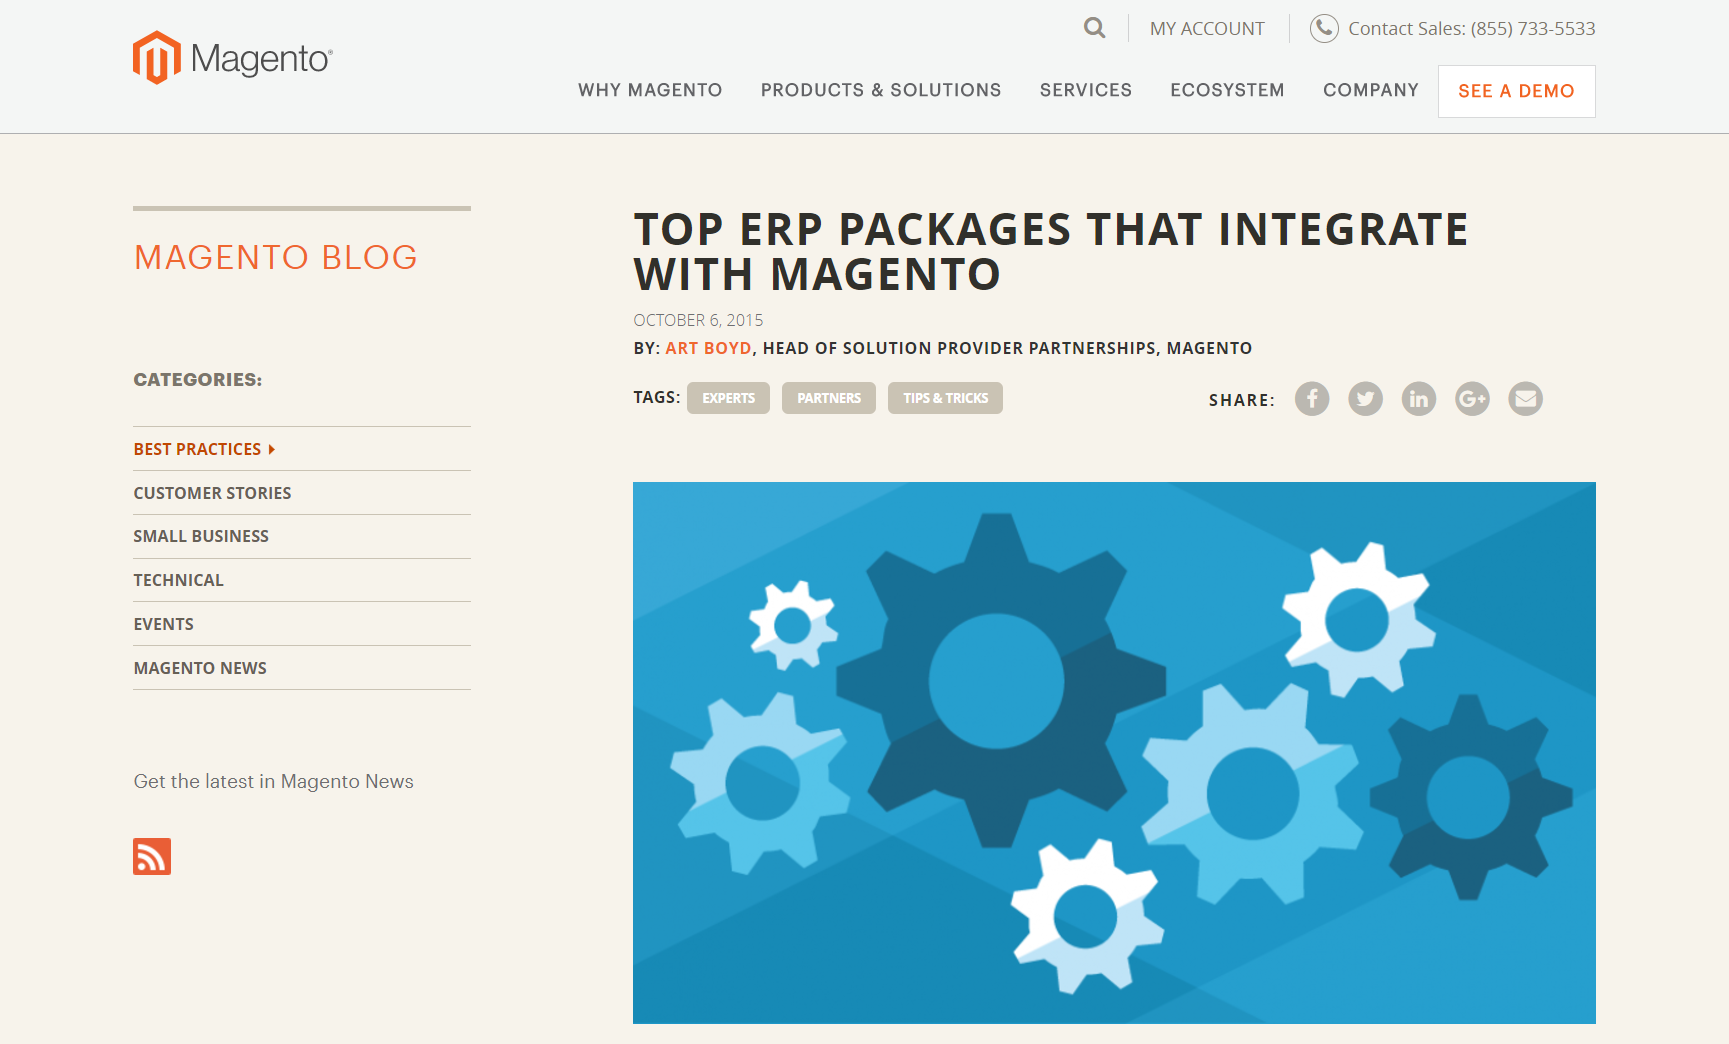 Magento Blog - top ERP packages